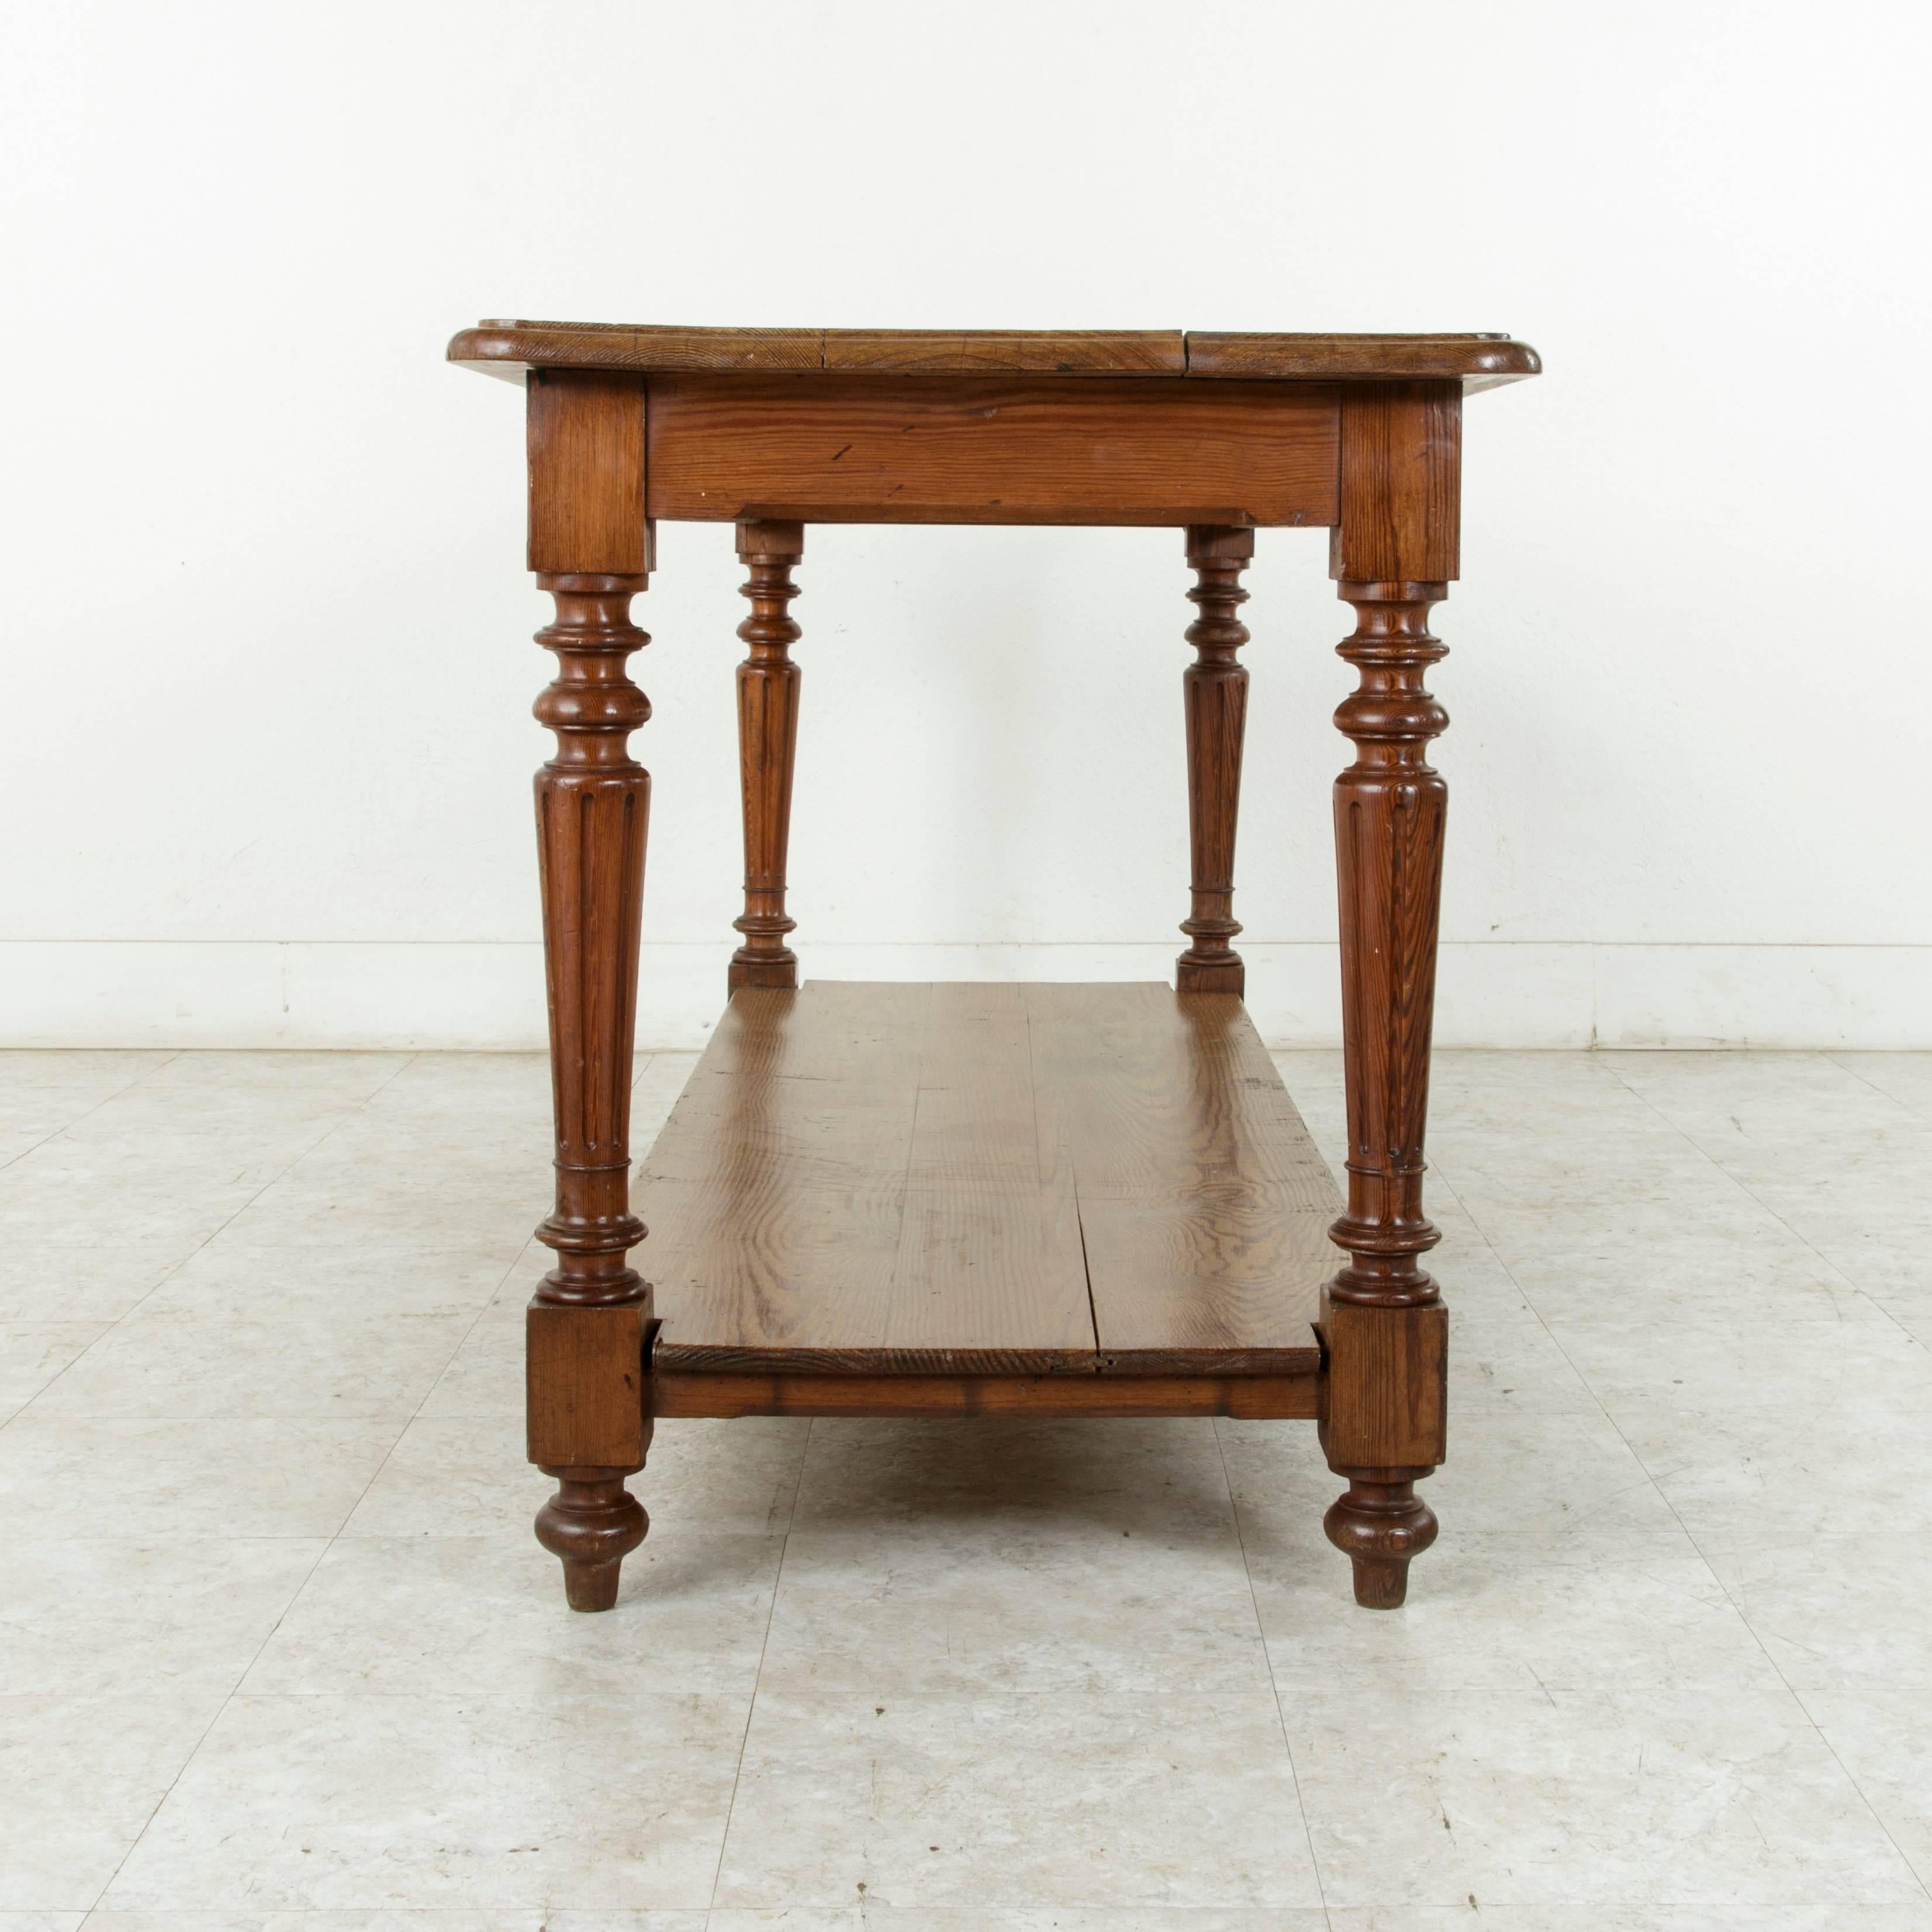 Early 20th Century French Pitch Pine Draper's Table, Work Table, or Kitchen Island, circa 1900